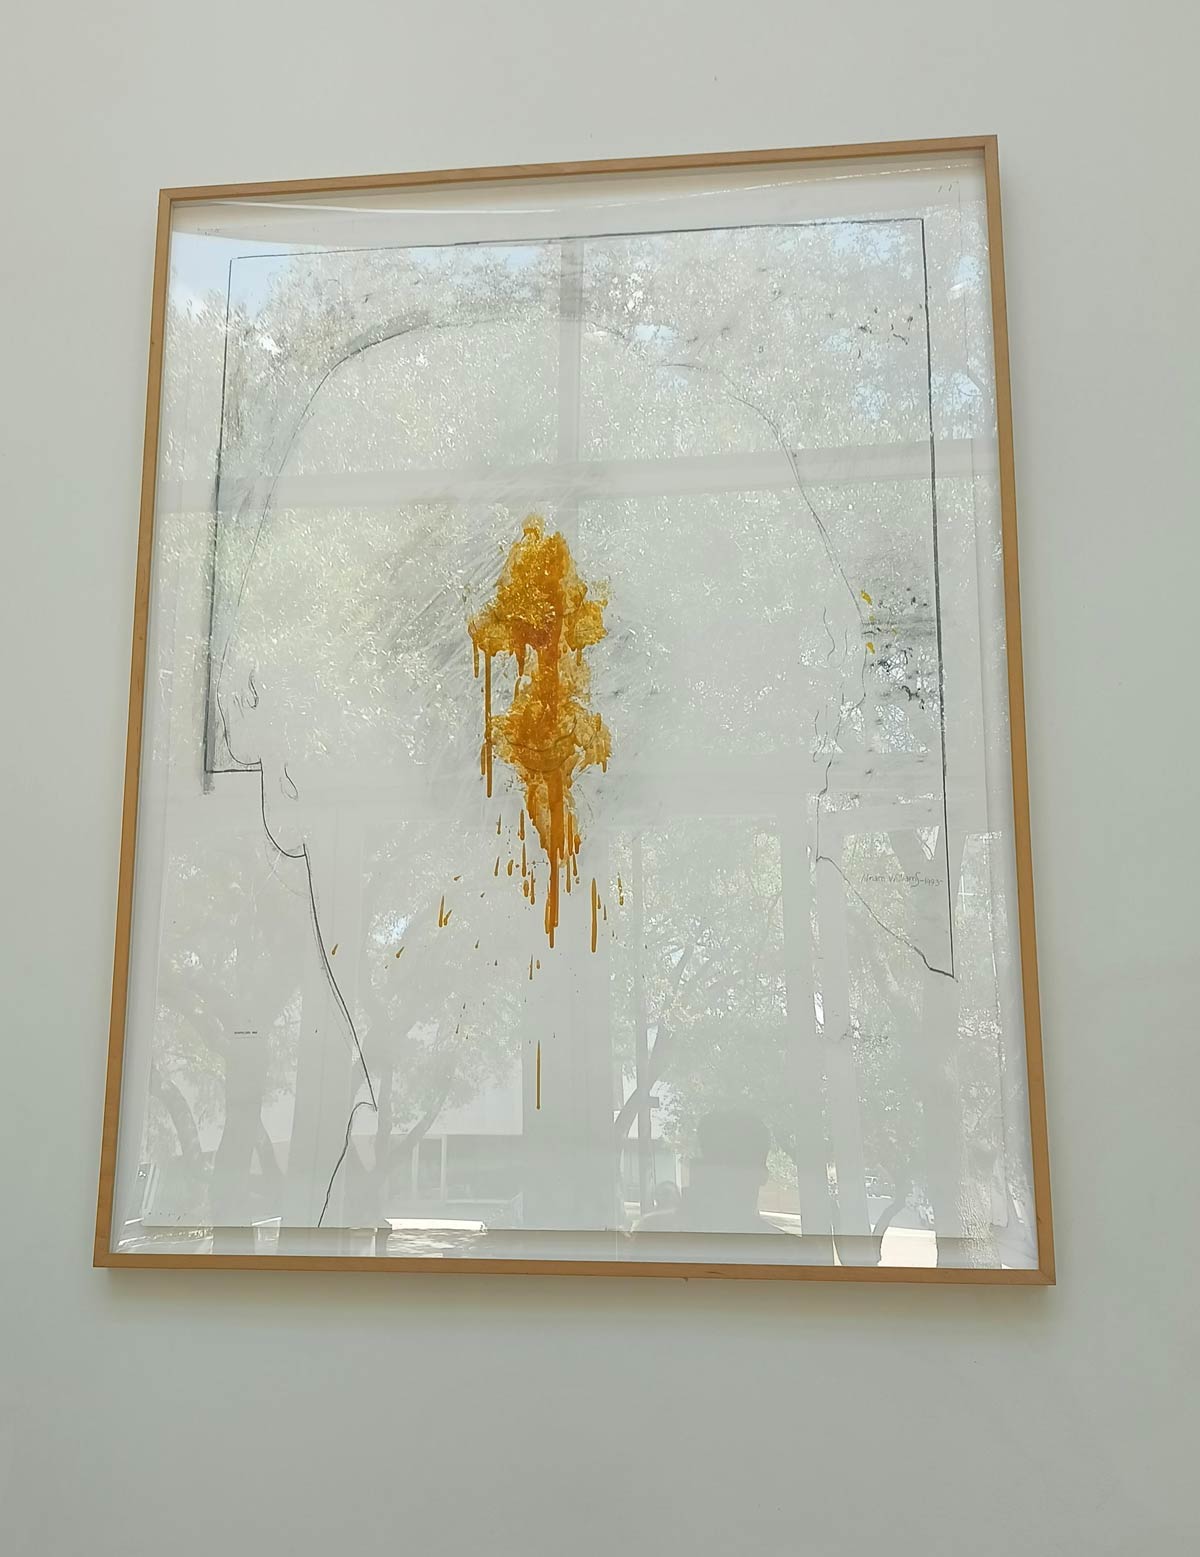 Any art enthusiasts that can tell me the inner meaning of this art that's hanging at my university?